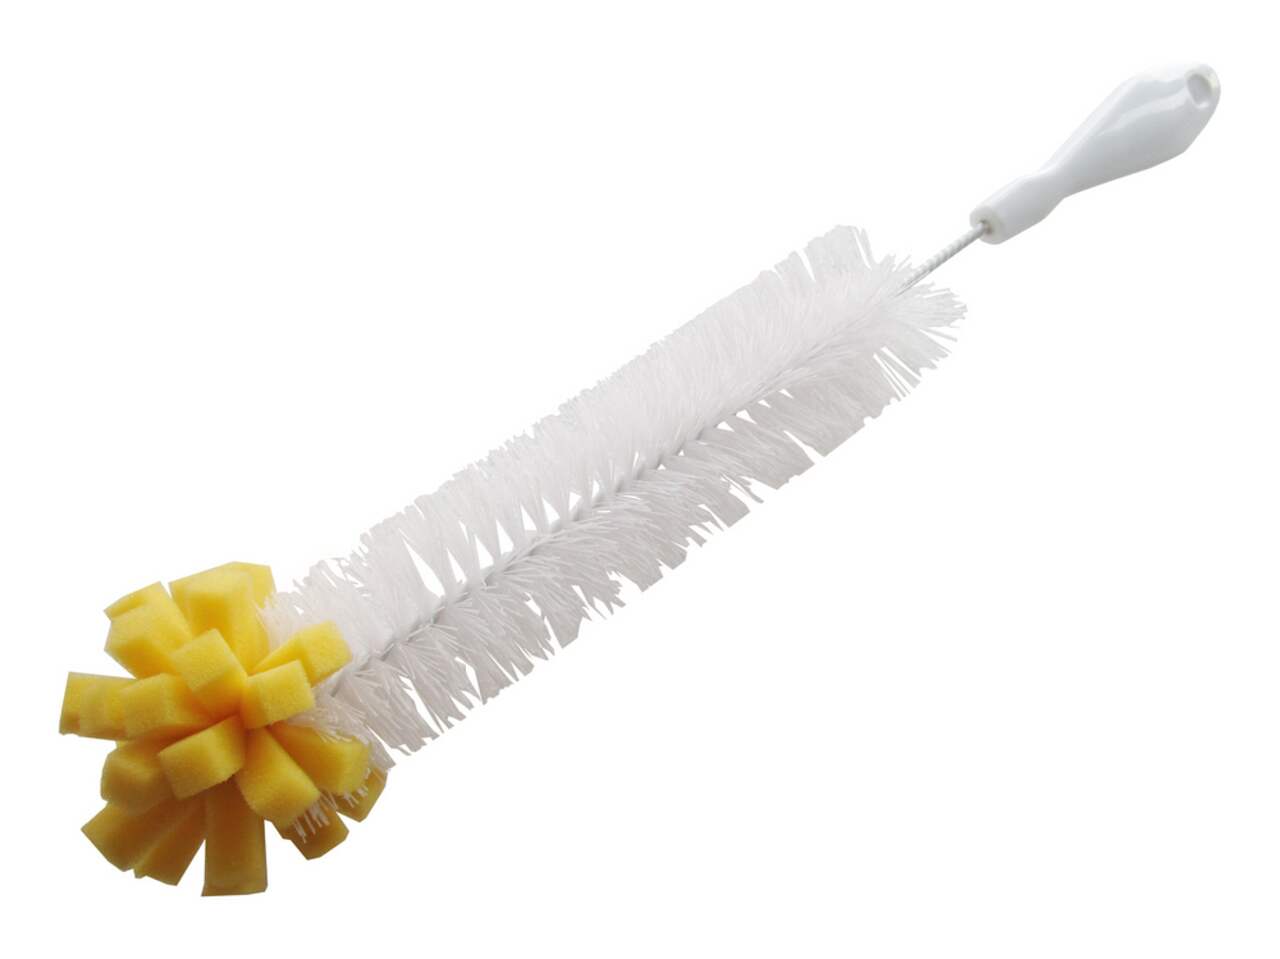 Sponge Cleaning Brush For Vehicles Effective Tire Cleaner, Soft